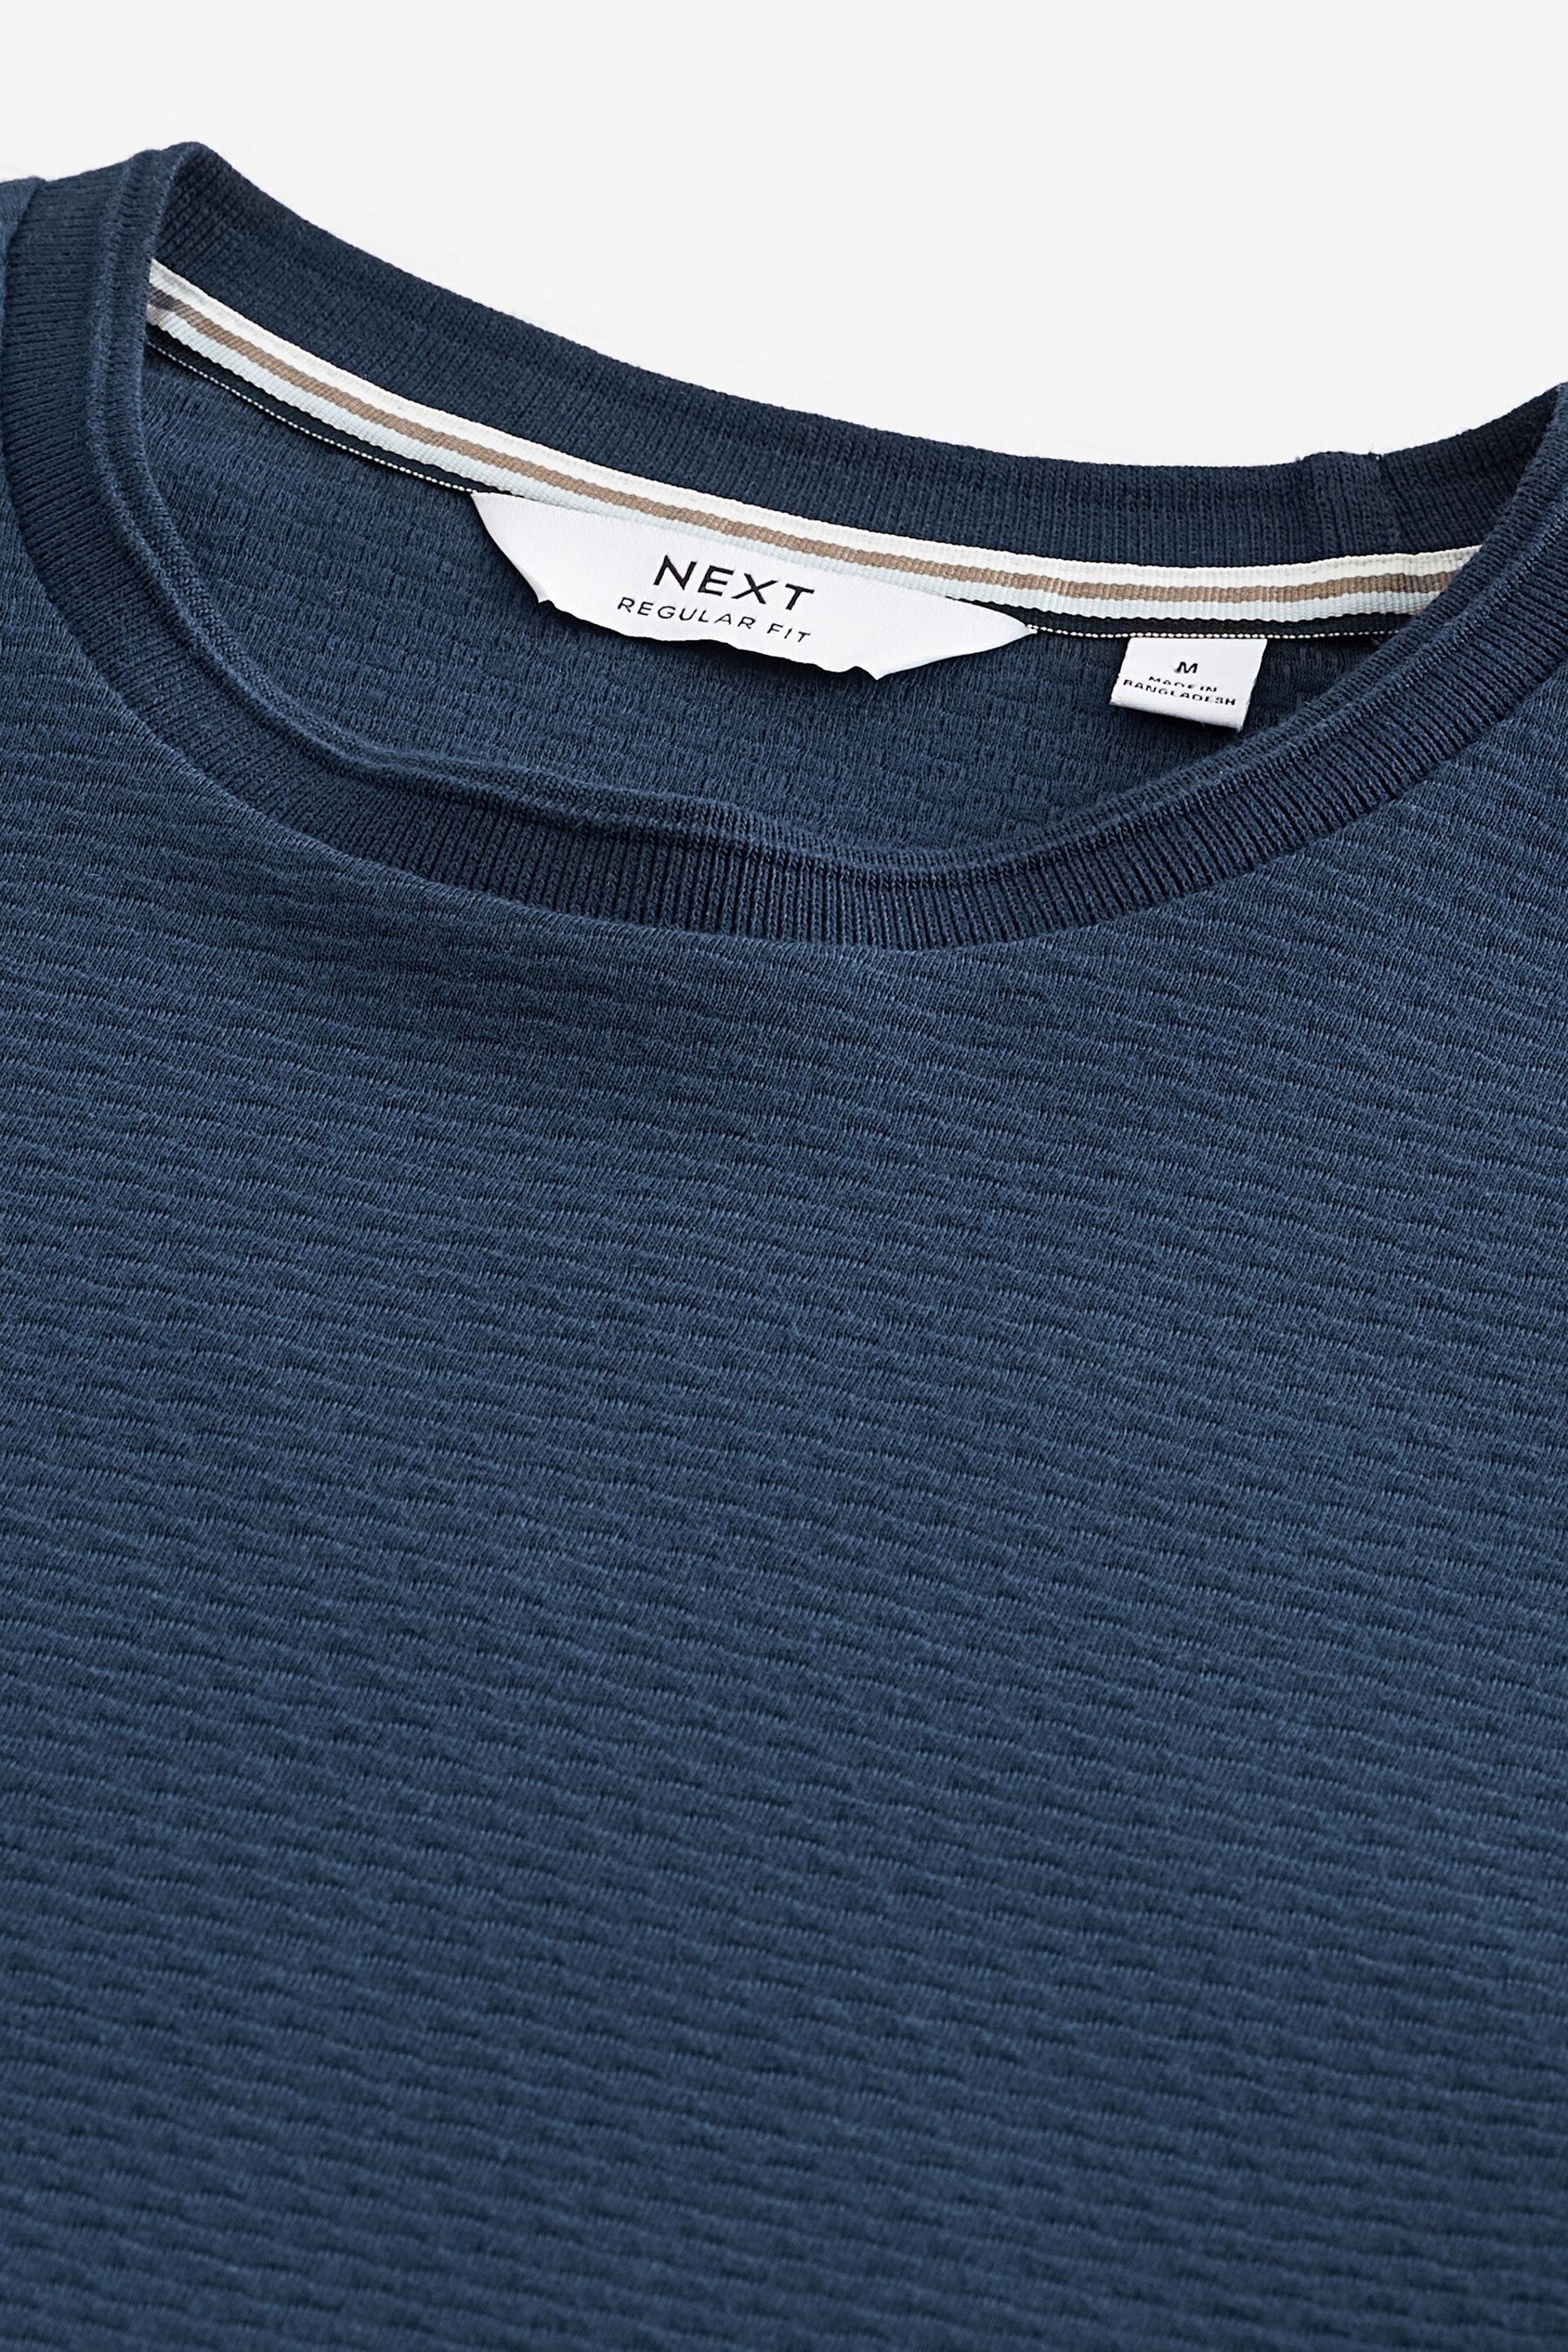 Navy Textured T-Shirt - Image 9 of 9